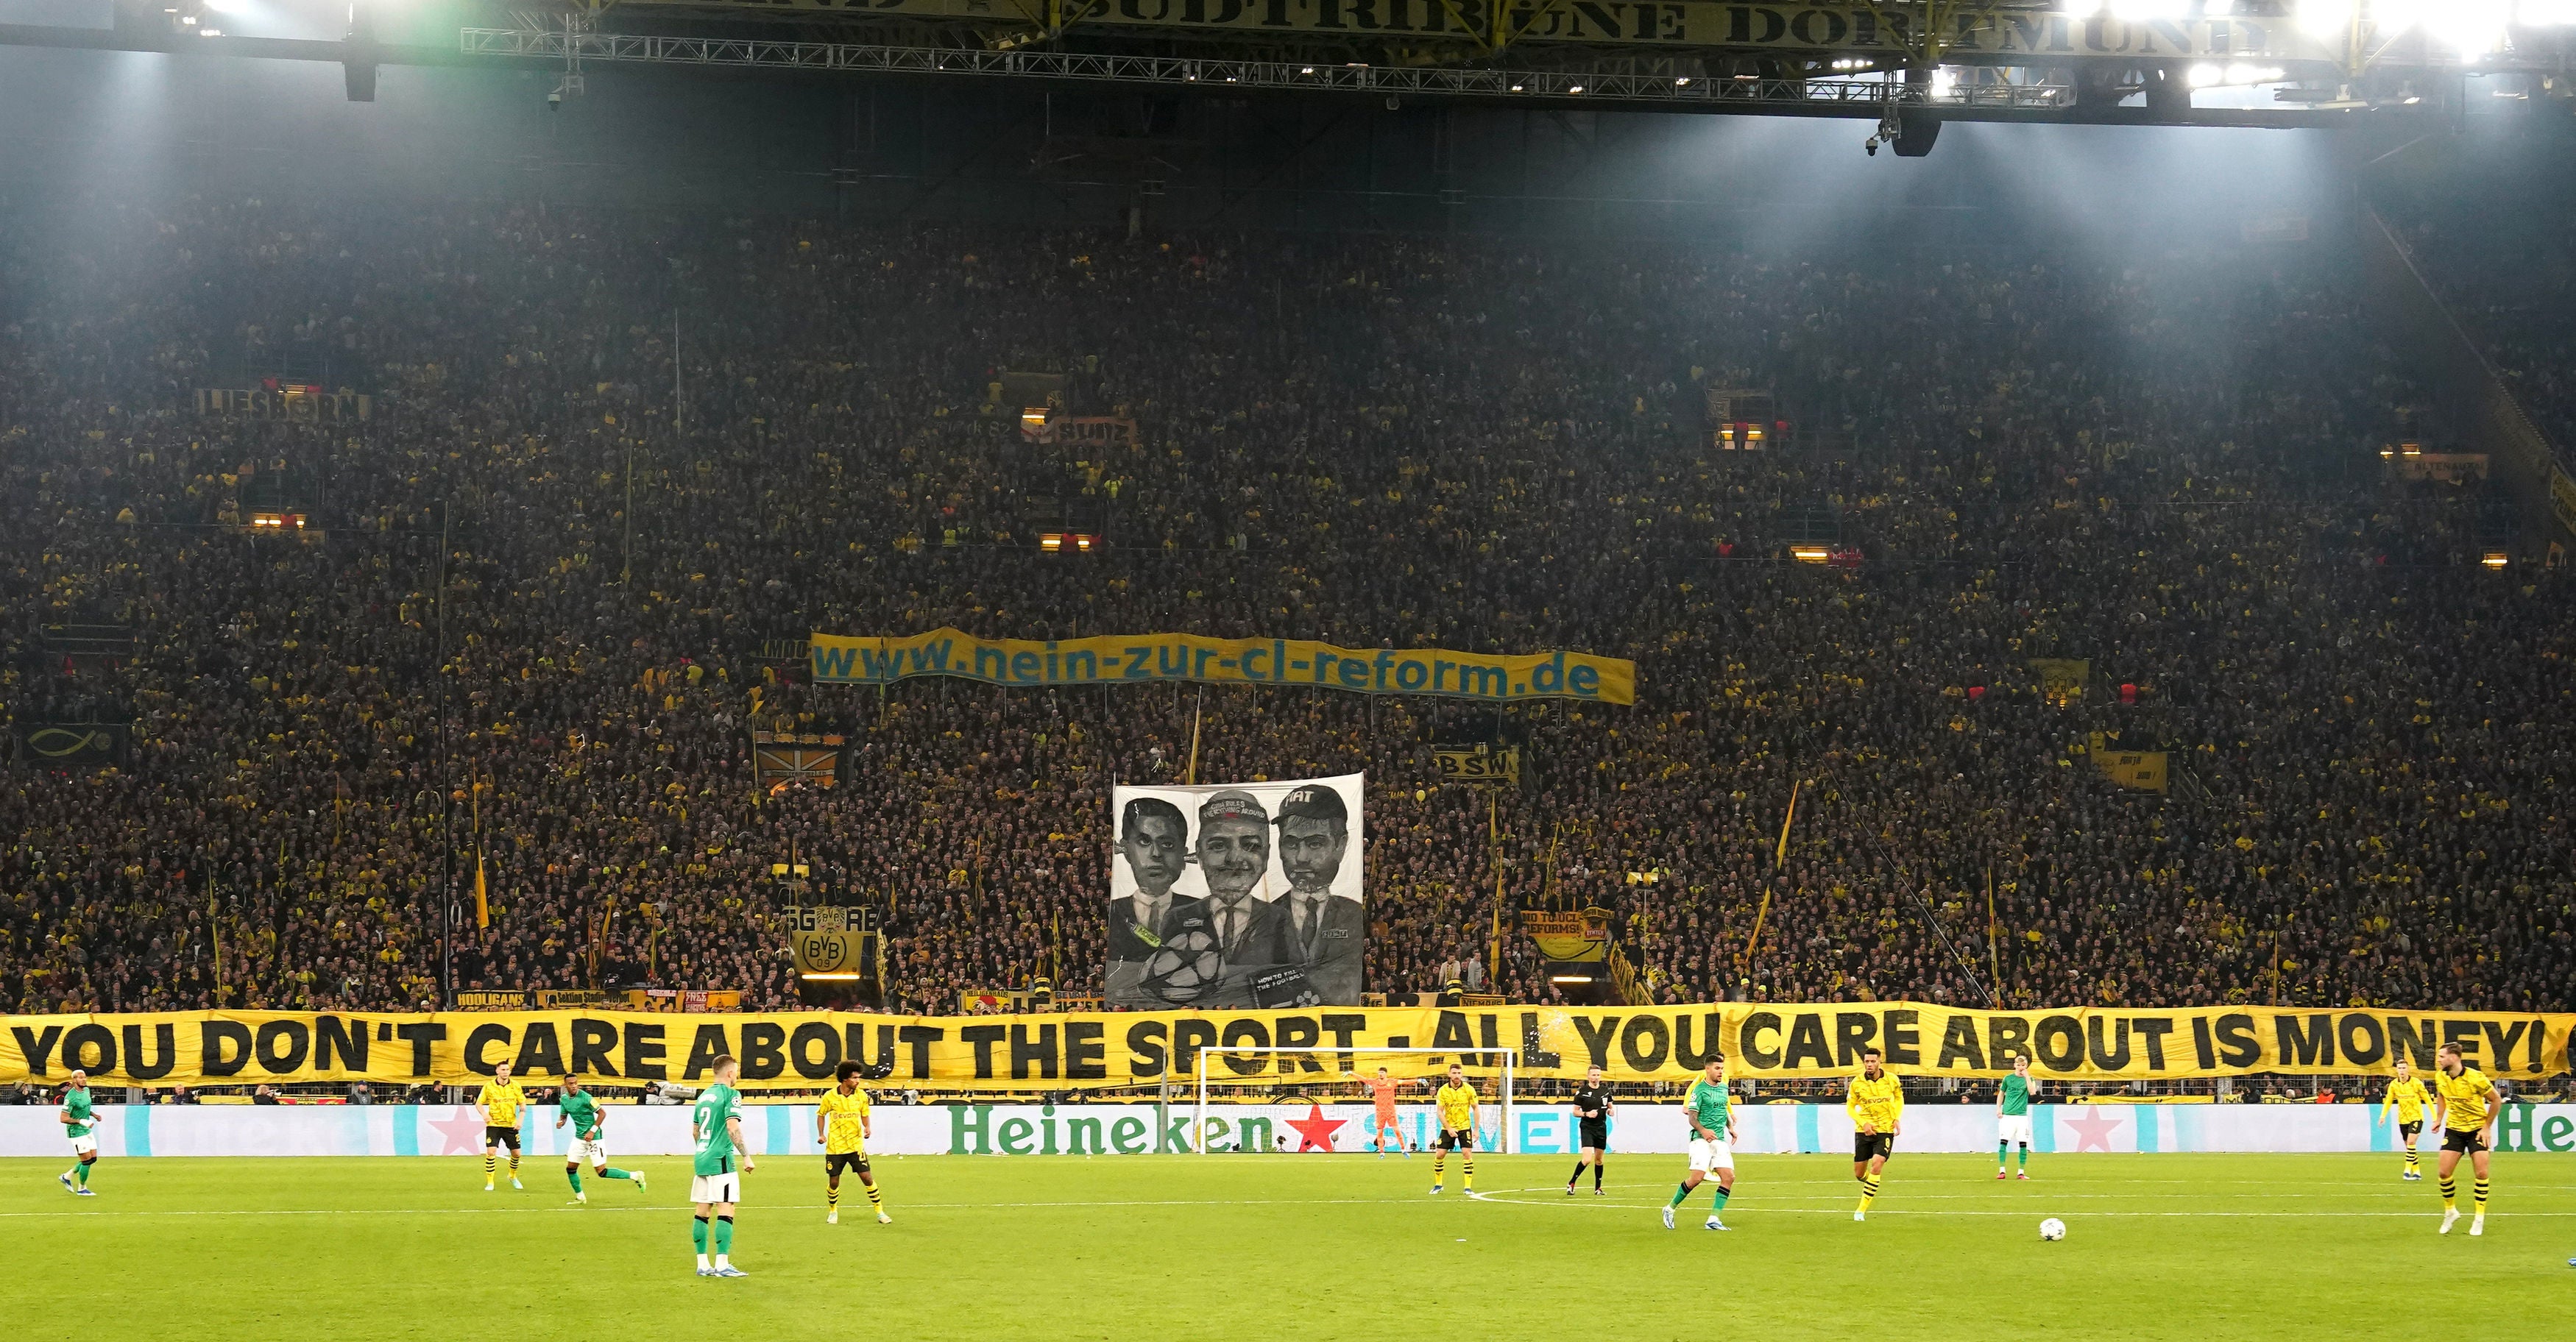 Dortmund fans criticised Uefa with their protest